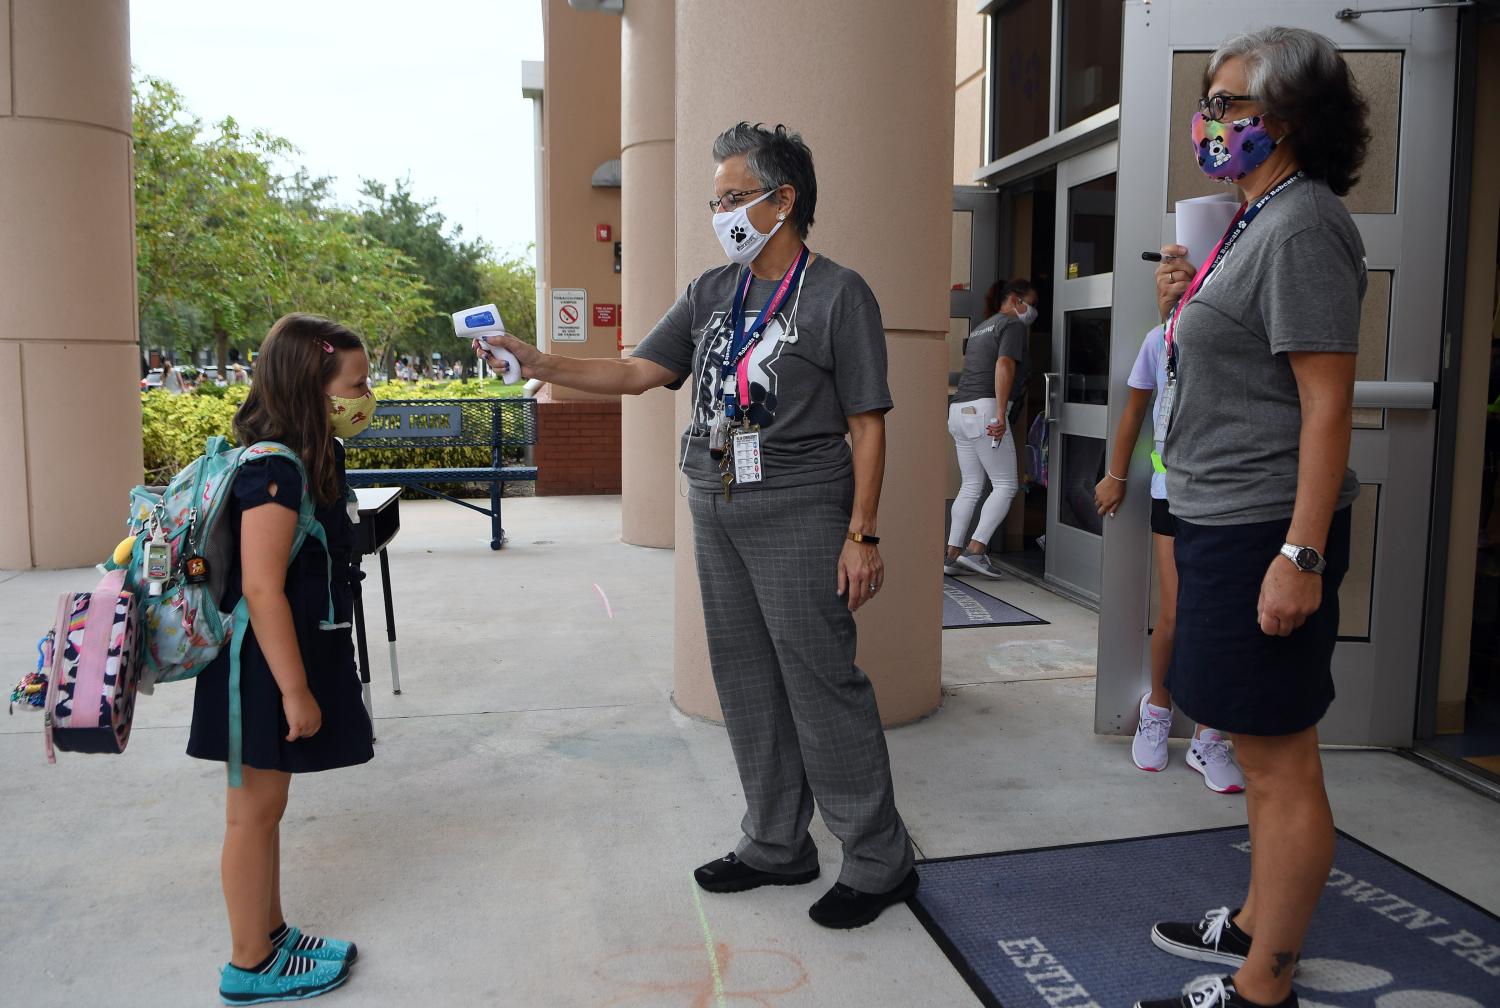 A school employee checks the temperature of a student as she returns to school on the first day of in-person classes in Orange County at Baldwin Park Elementary School on August 21, 2020 in Orlando, Florida, US. Face masks and temperature checks are required for all students as Florida's death toll from COVID-19 now exceeds 10,000, with some teachers refusing to return to their classrooms due to health concerns. (Photo by Paul Hennessy/NurPhoto)NO USE FRANCE